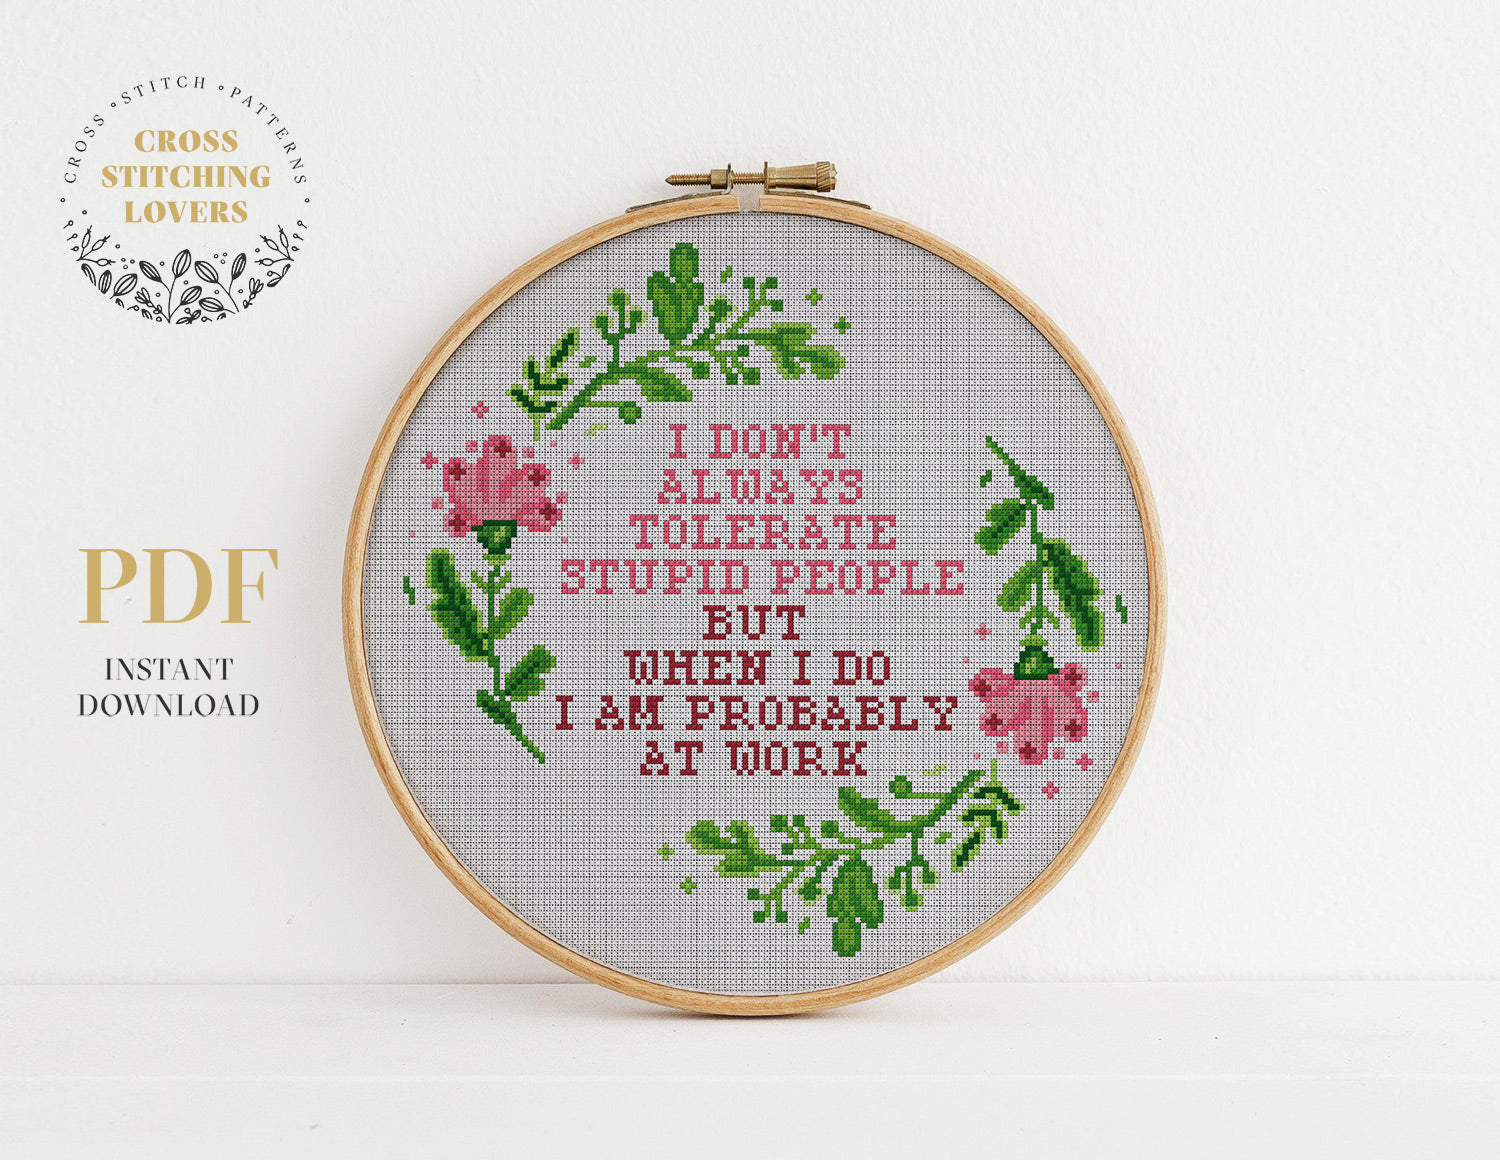 I DON'T ALWAYS TOLERATE STUPID PEOPLE BUT WHEN I DO I AM PROBABLY AT WORK - Cross stitch pattern